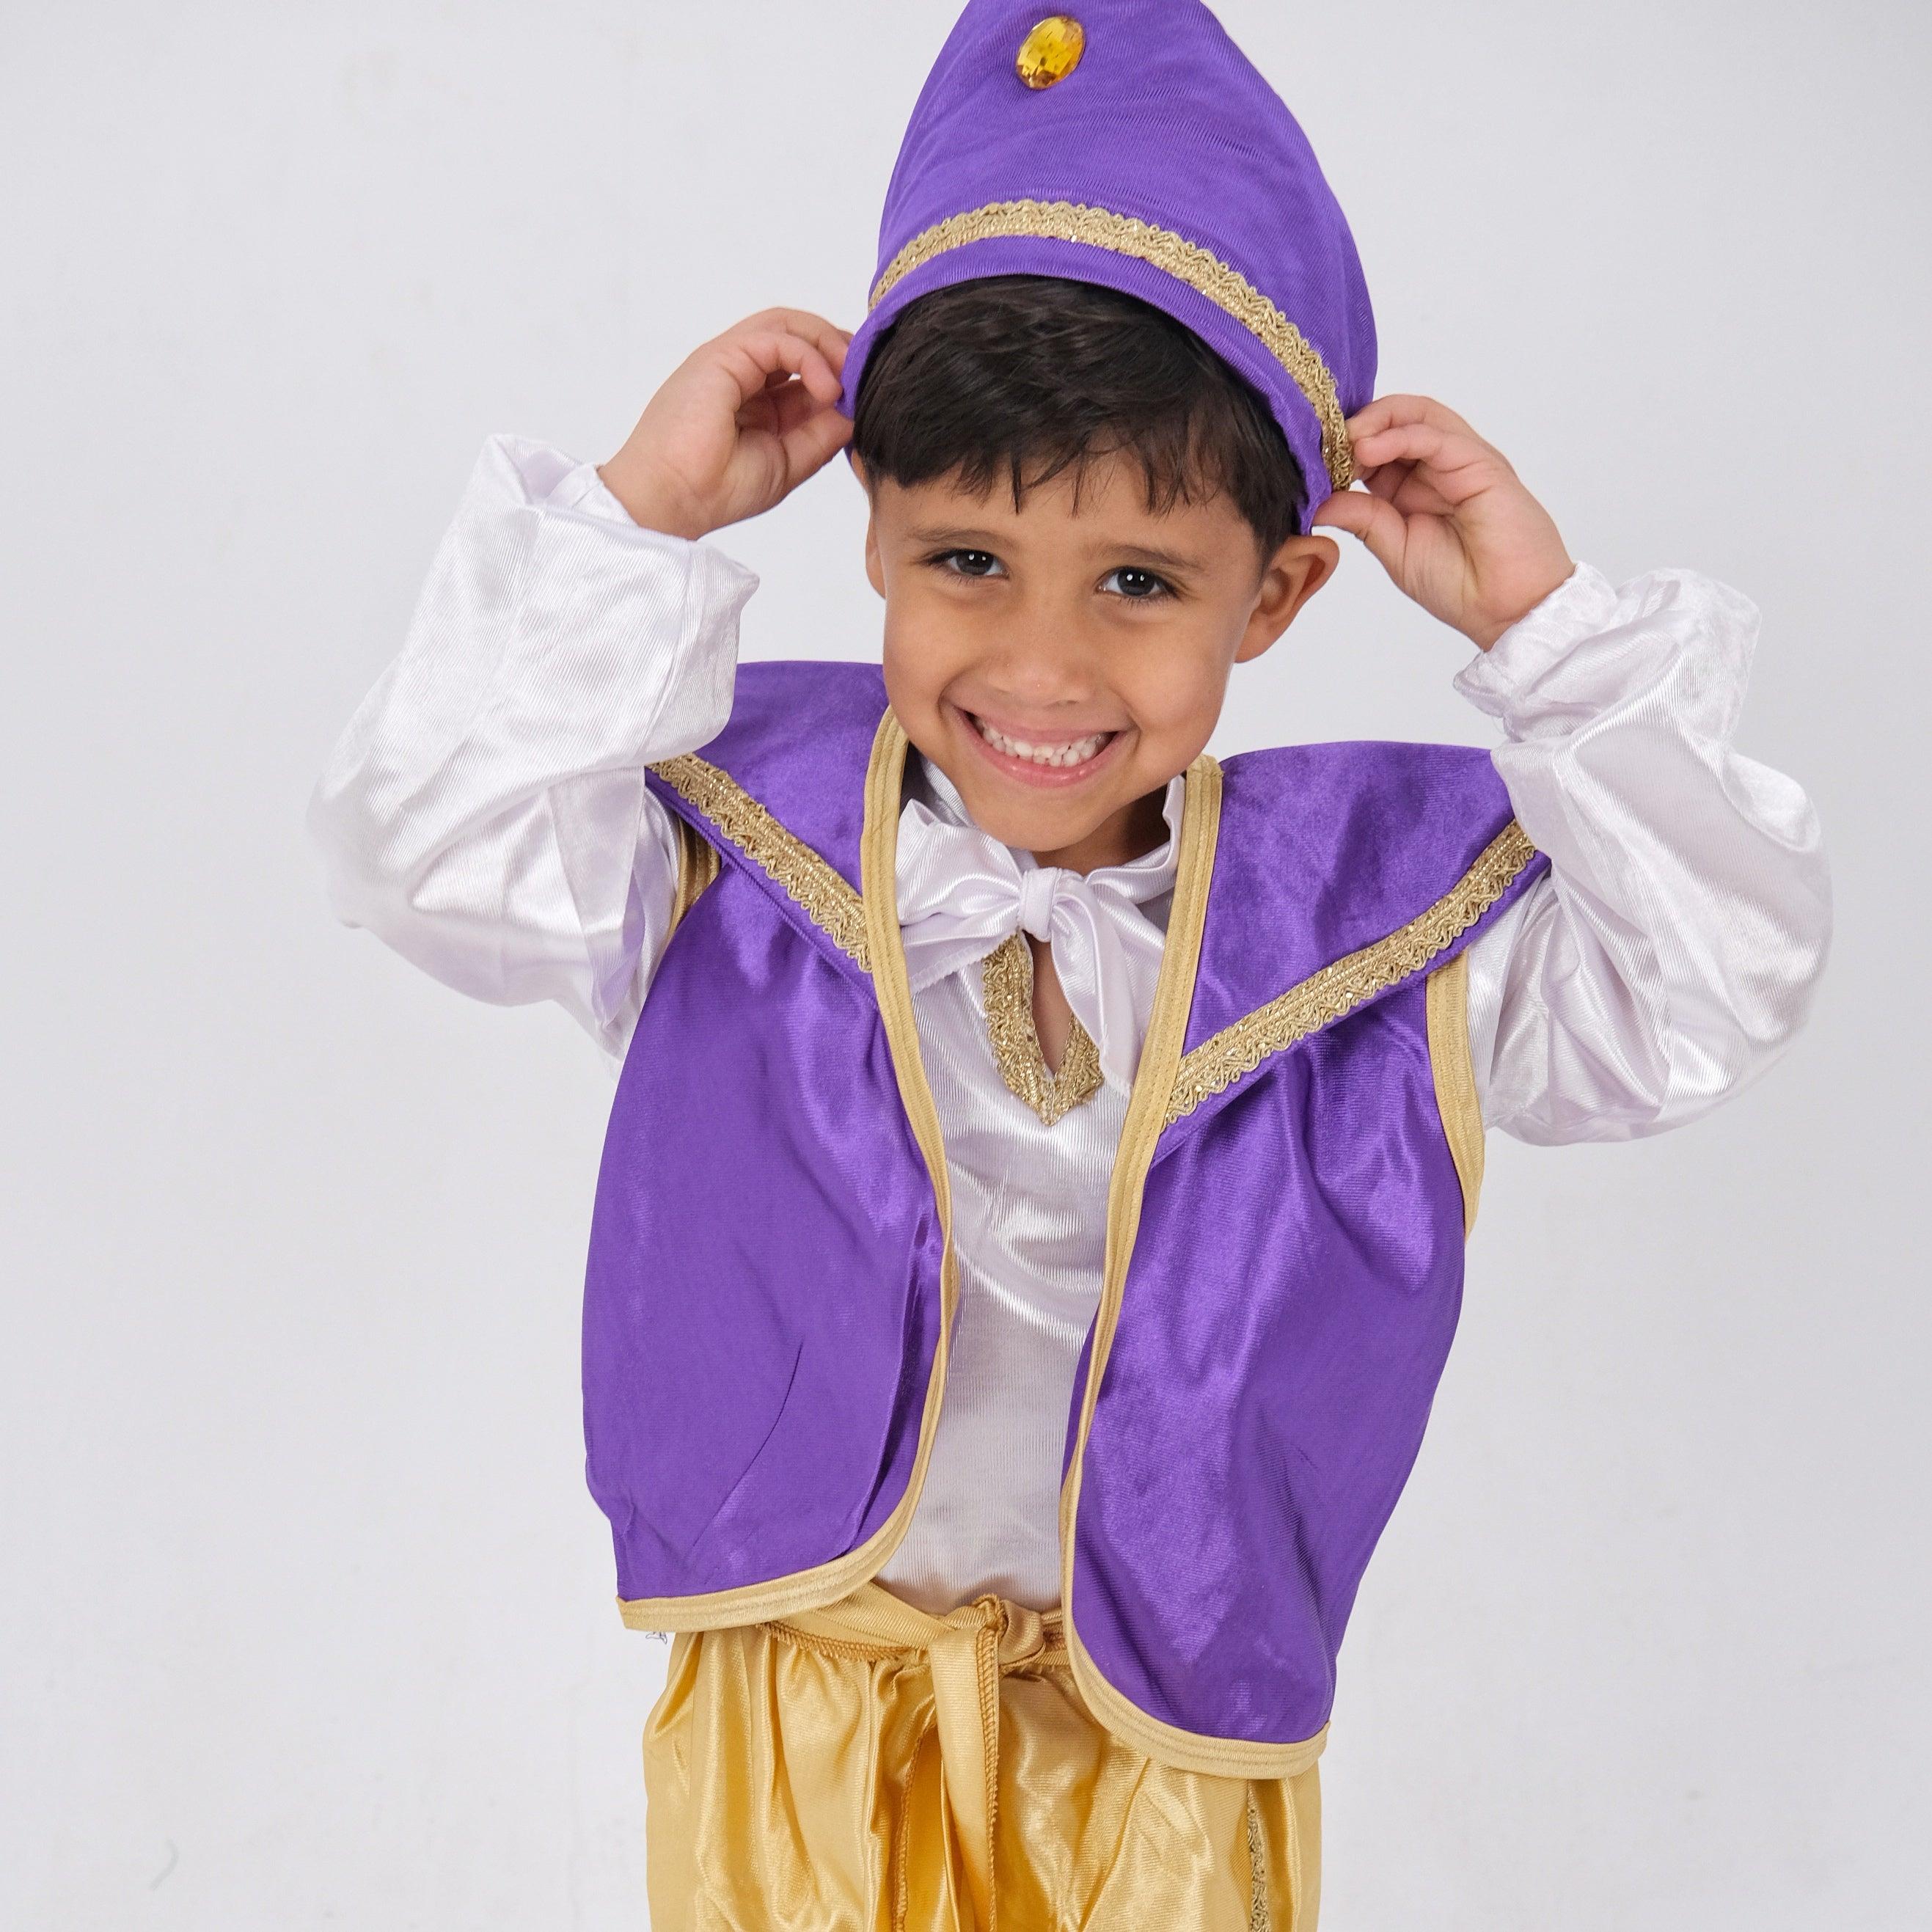 Aladdin Costume - Ourkids - The Party Animals